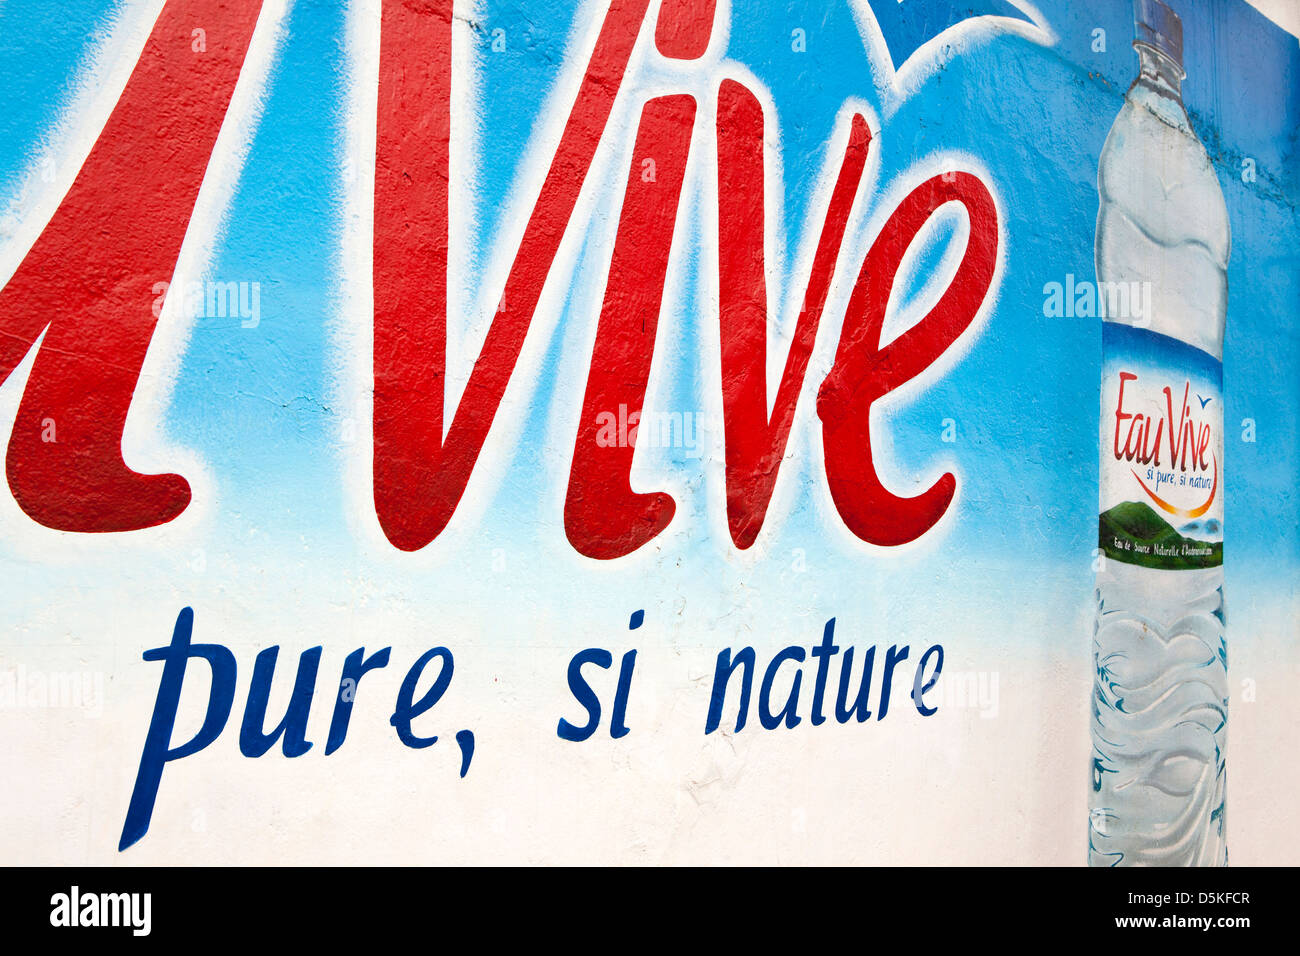 Madagascar, Nosy Be, Hell-Ville, Eau Vive bottled water advertisement hand painted on wall Stock Photo